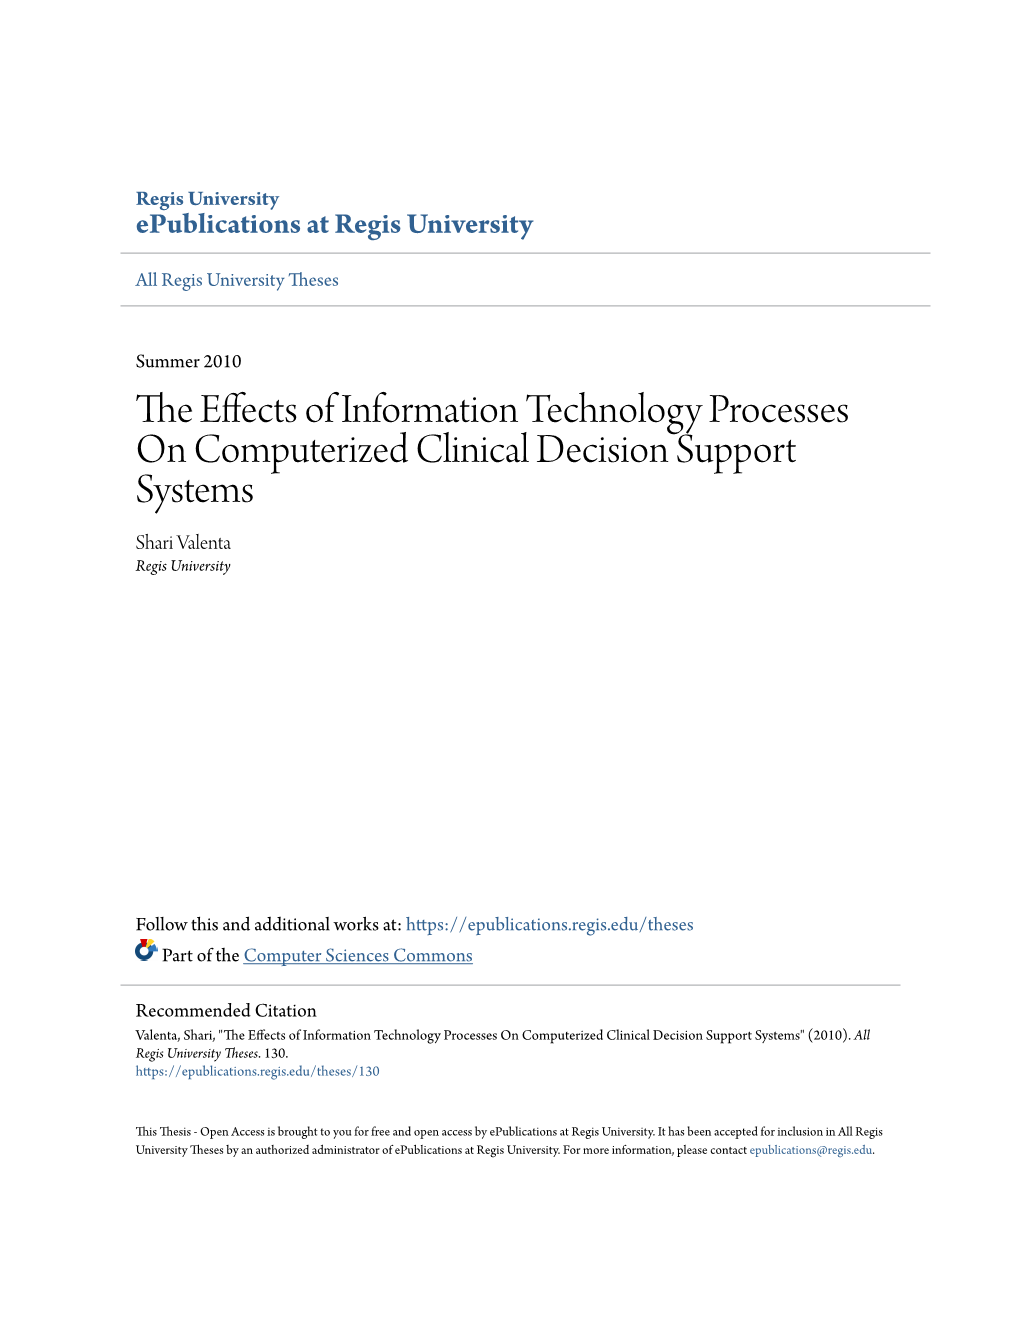 The Effects of Information Technology Processes on Computerized Clinical Decision Support Systems" (2010)